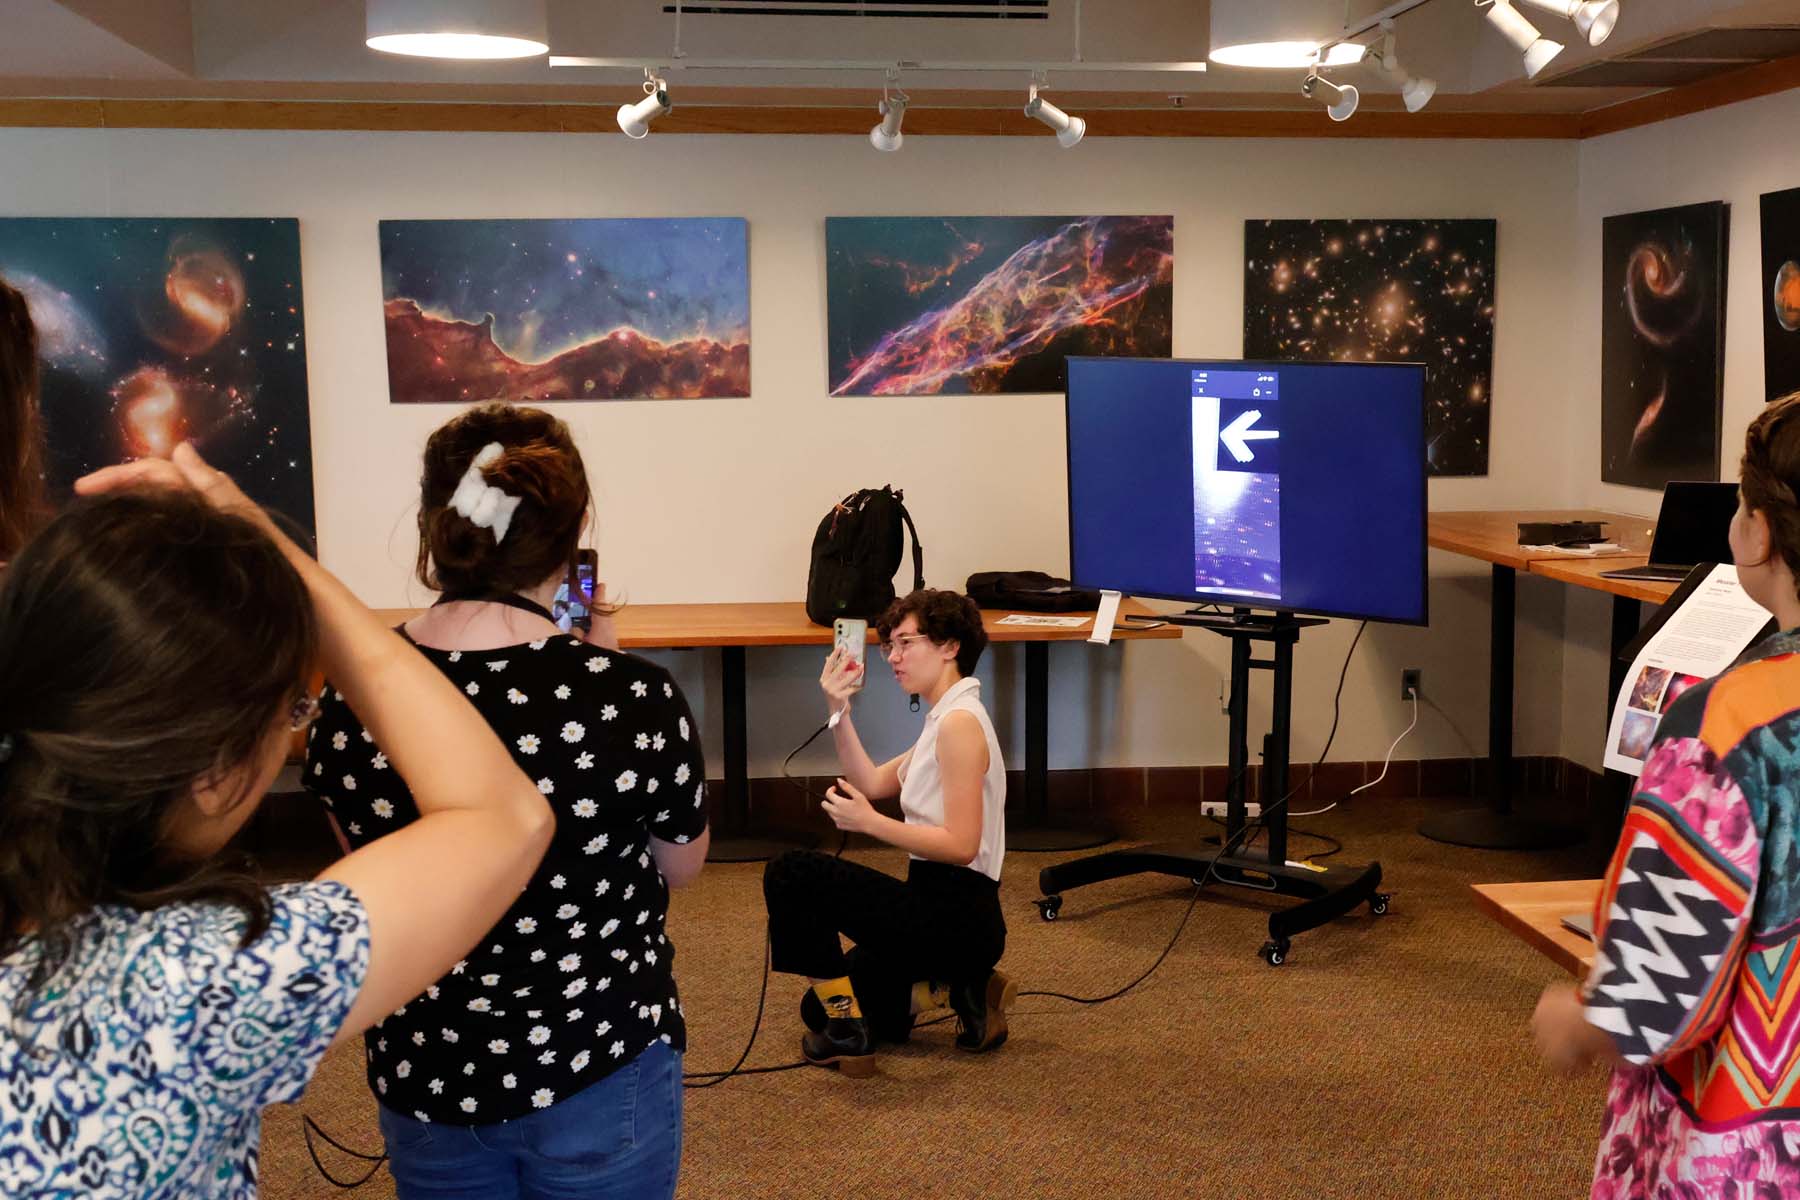 A student kneels looking at a smartphone, what is on her screen is displayed on the television behind her. A group of people watch, and one takes a video with her phone.